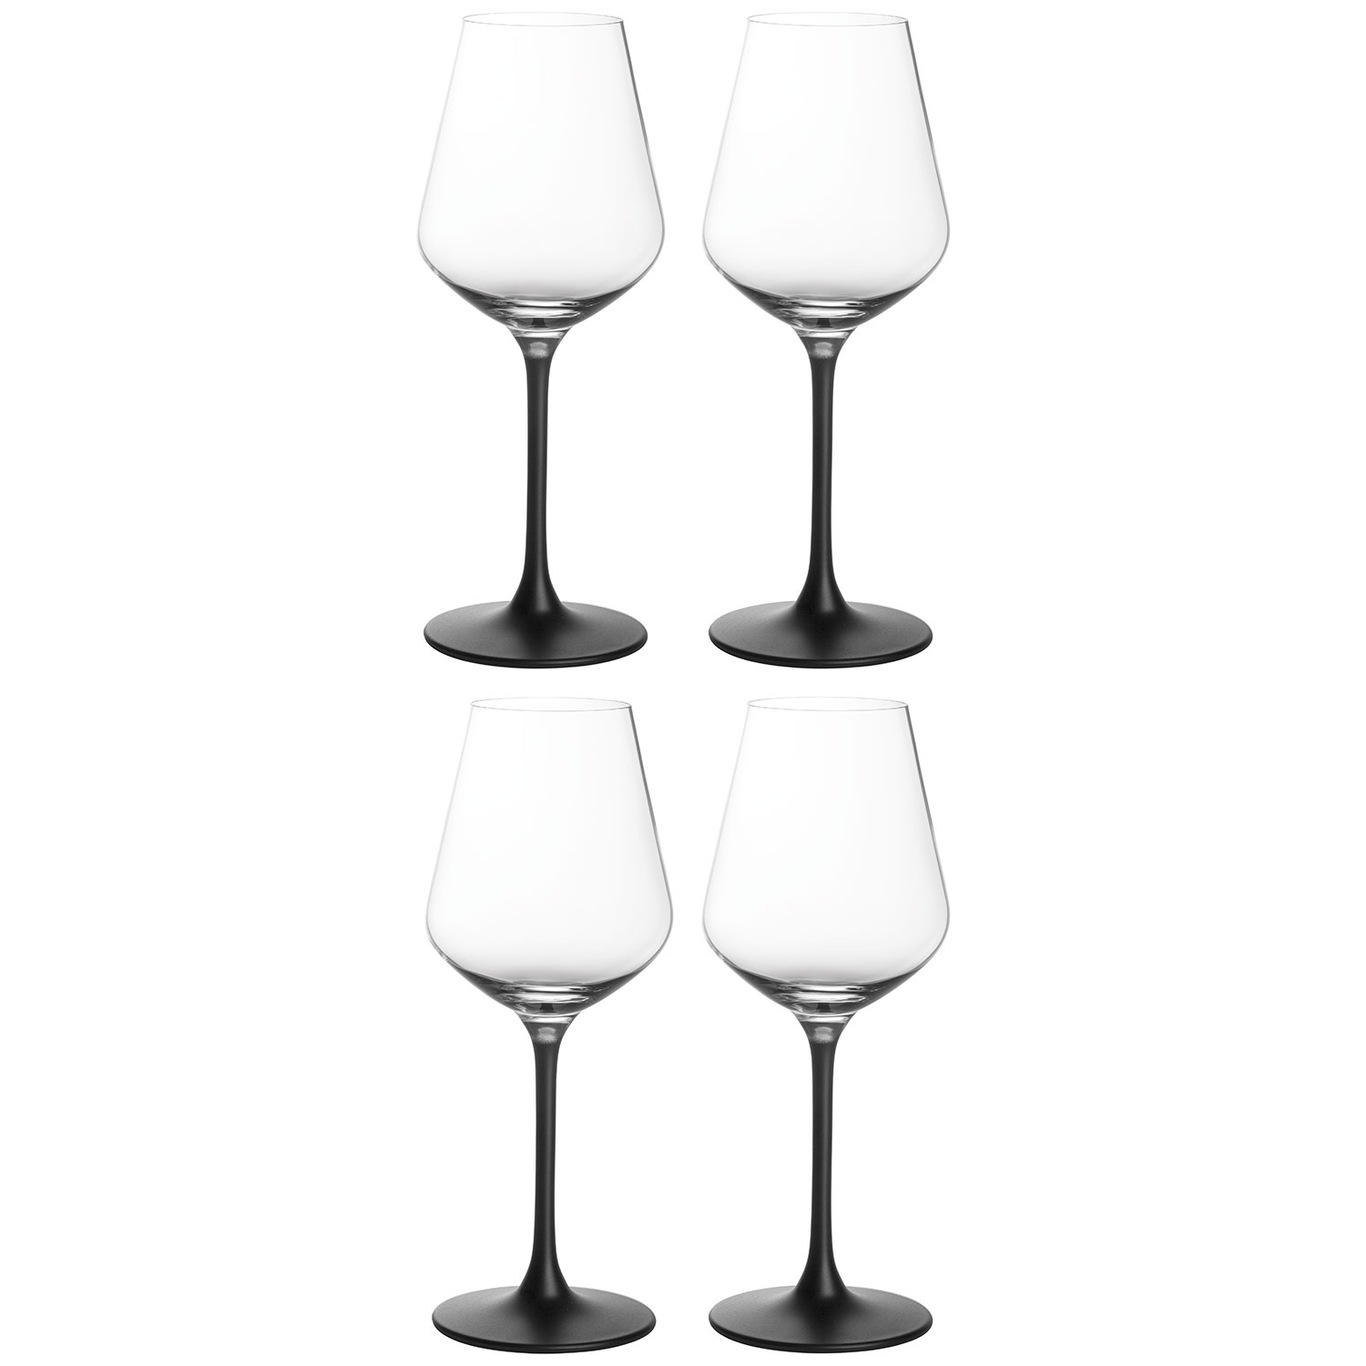 https://royaldesign.com/image/2/villeroy-boch-manufacture-rock-red-wine-glass-47-cl-4-pack-0?w=800&quality=80